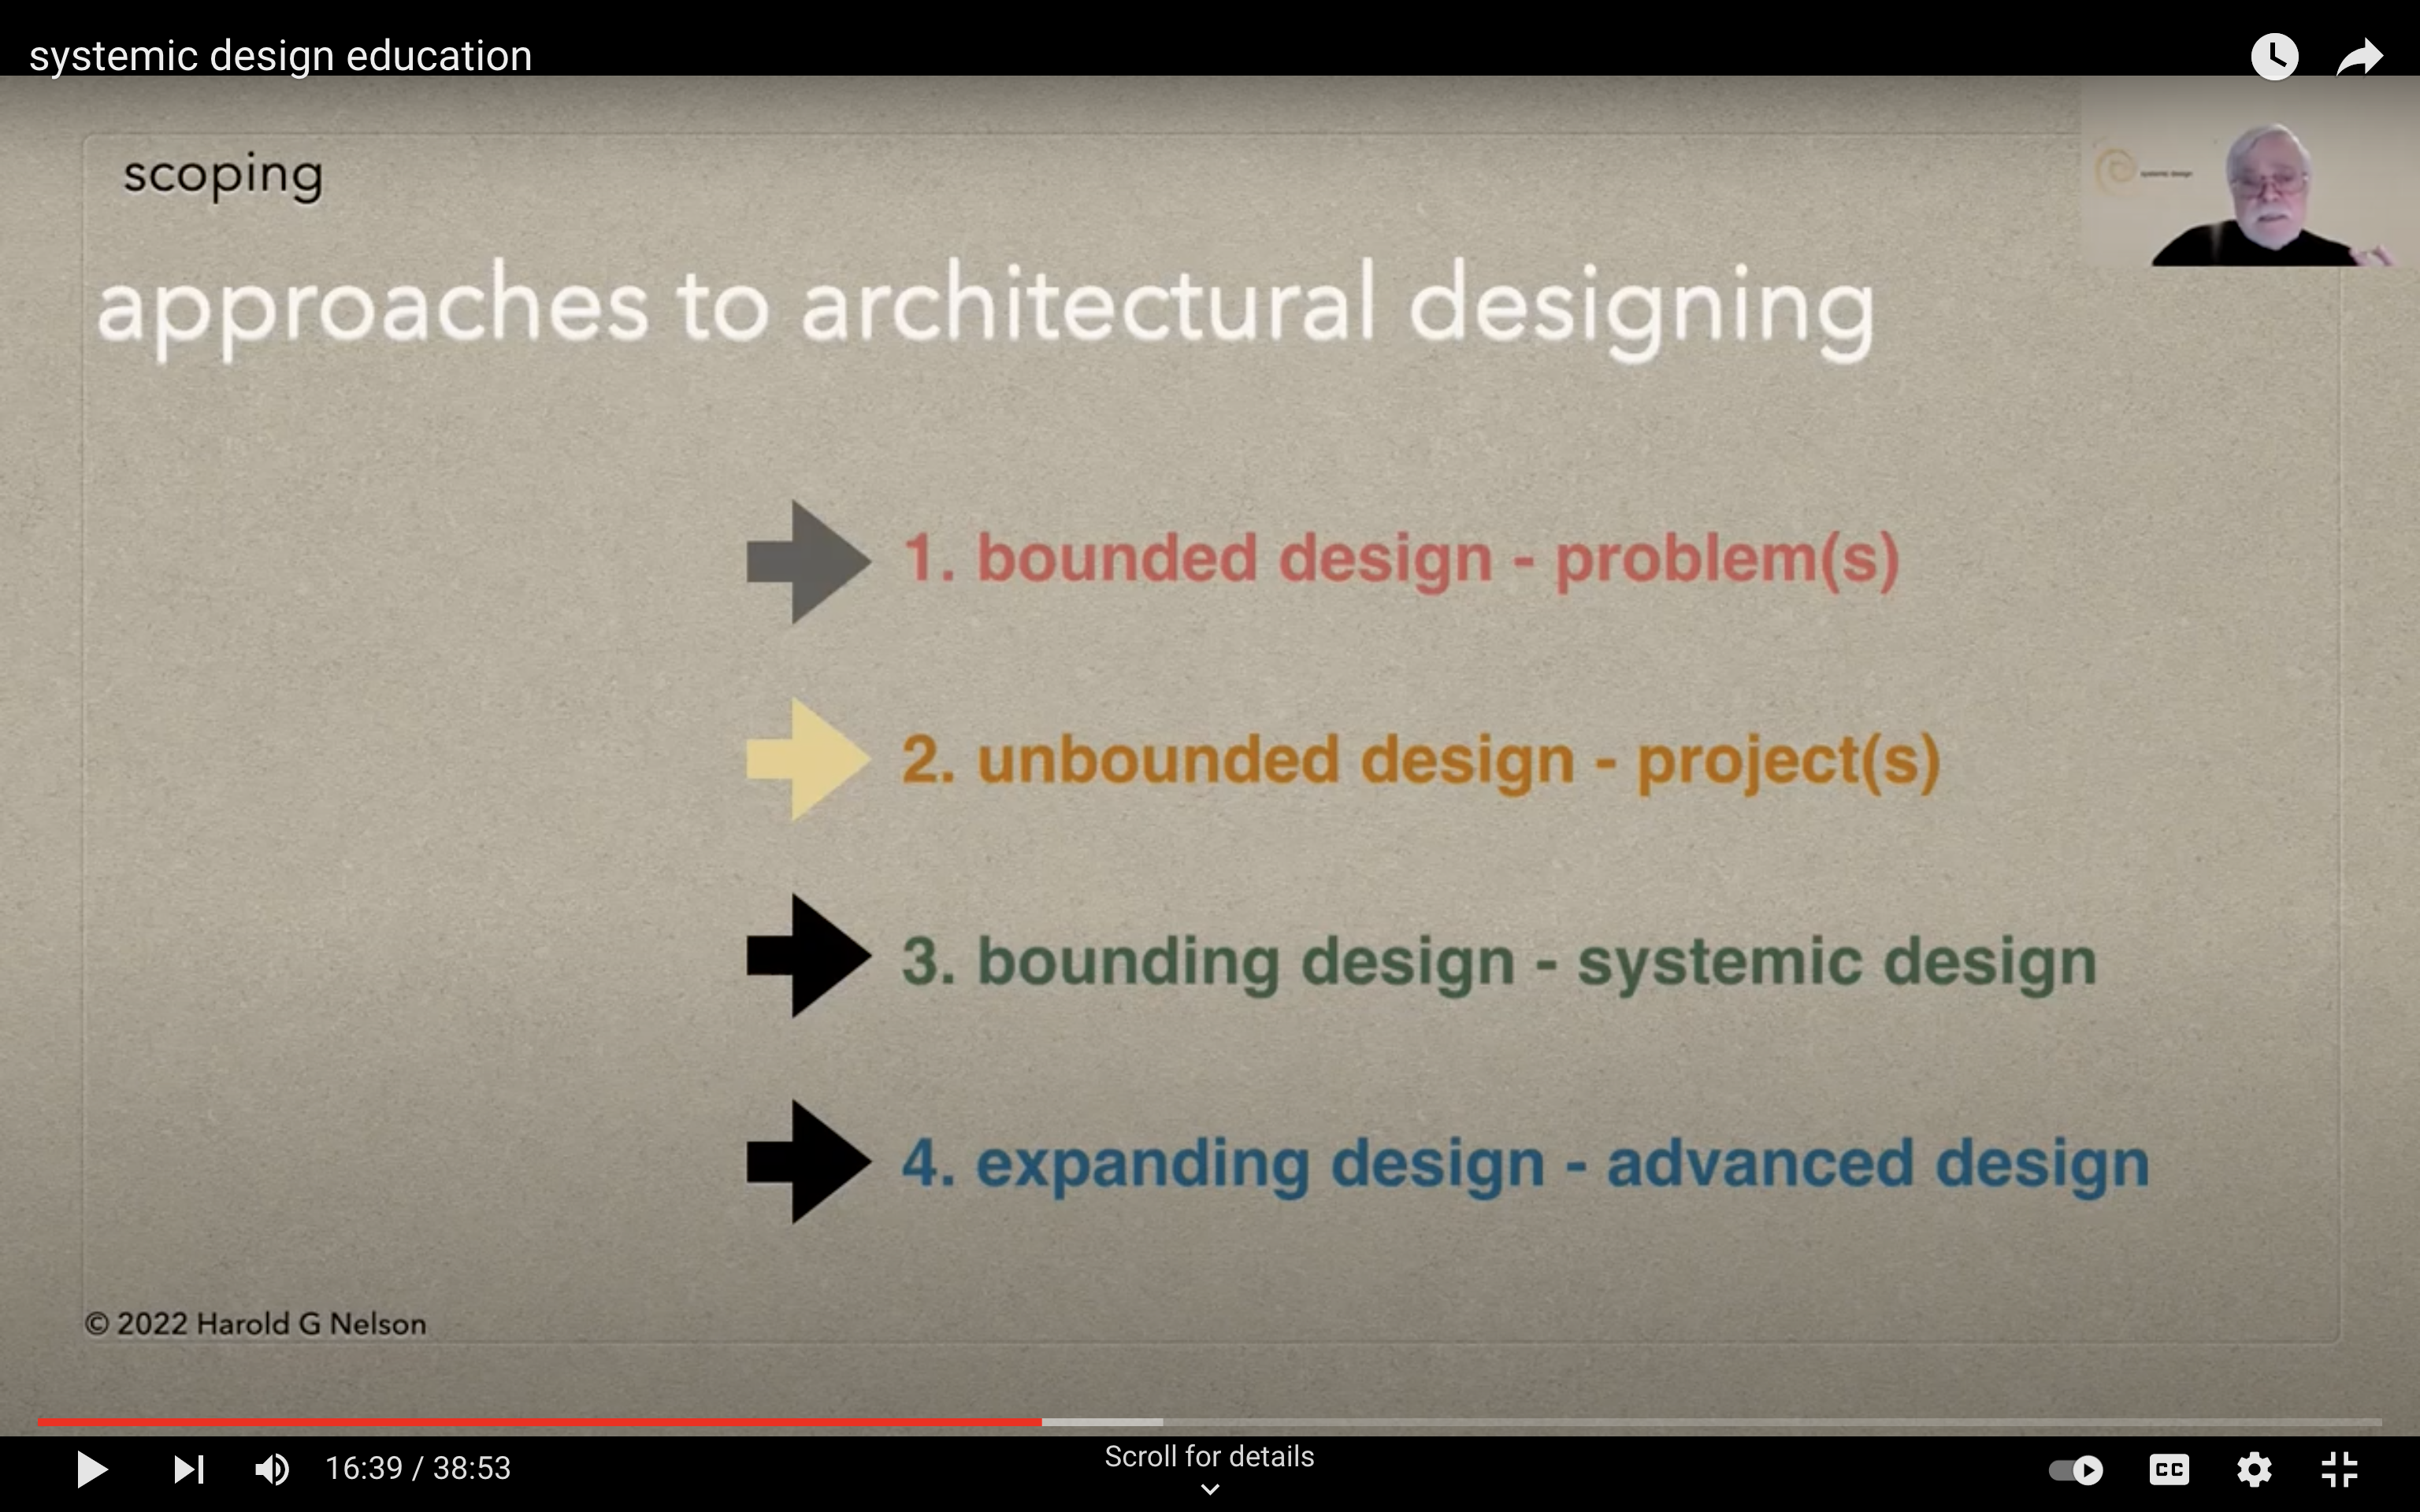 Approaches to architectural designing